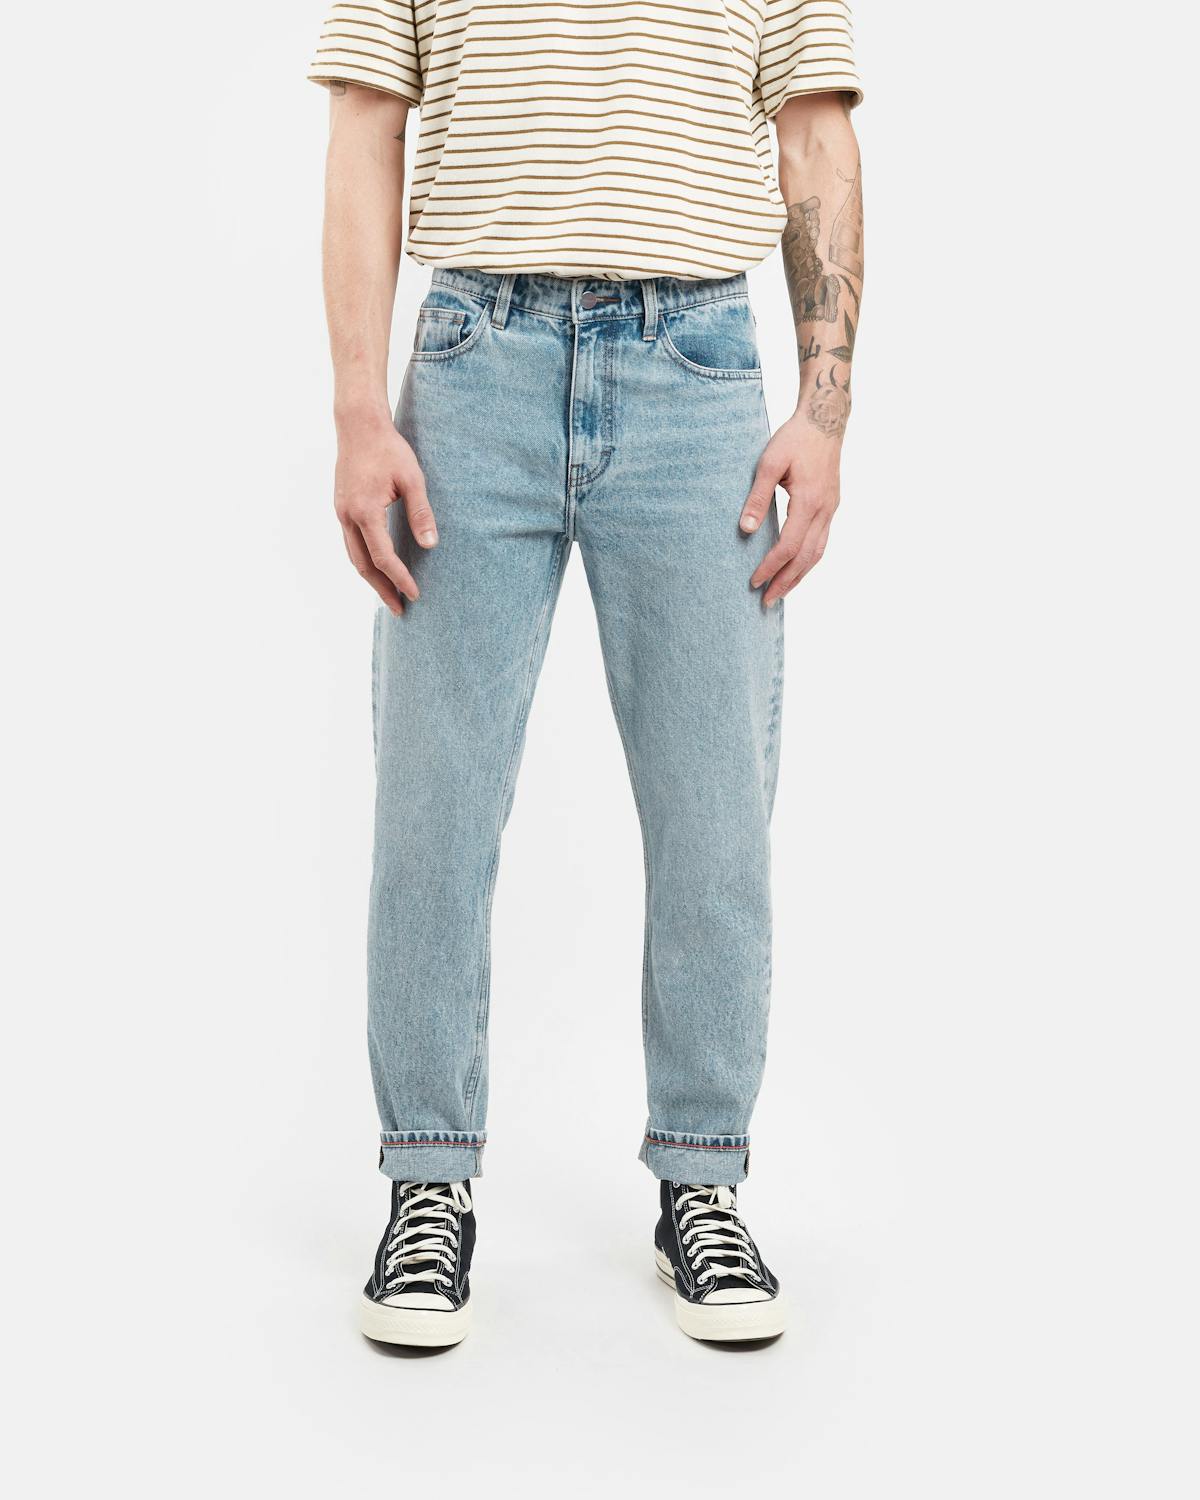 relaxed tapered fit jeans in organic light vintage - unspun custom